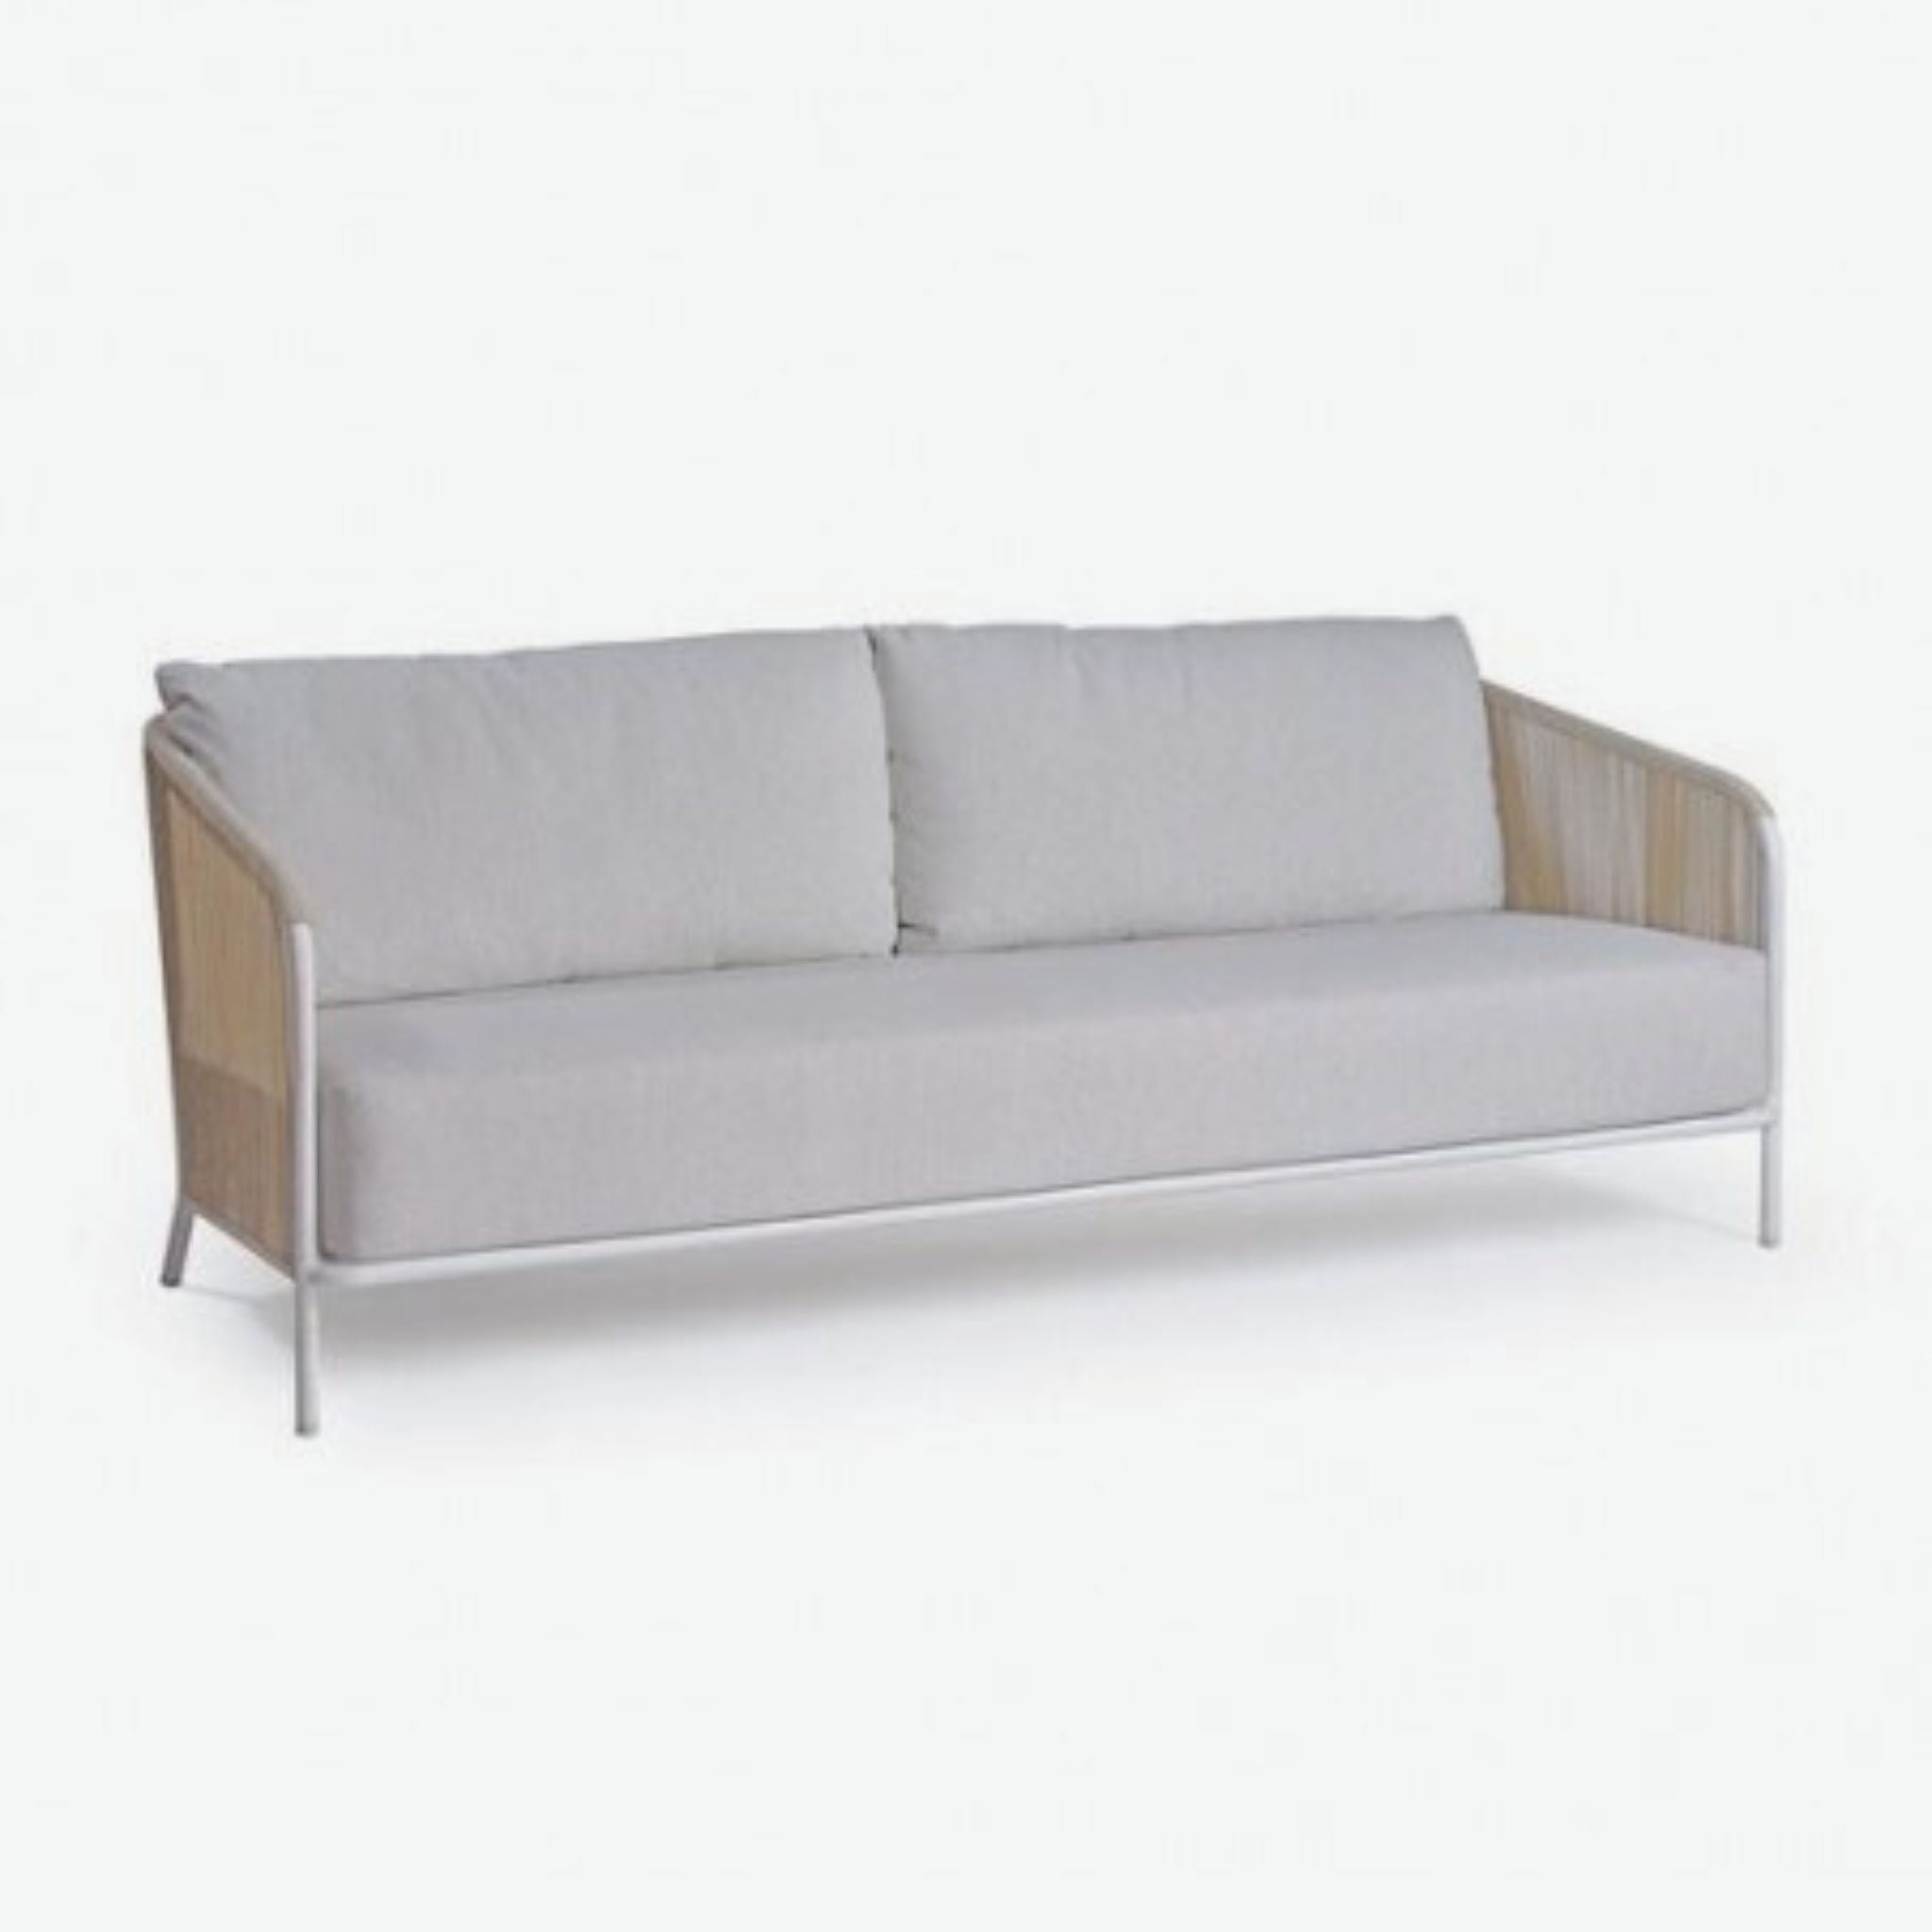 Crisal Decoracion July-1 Outdoor Sofa Aluminum and Beige Rope - ModernistaLiving